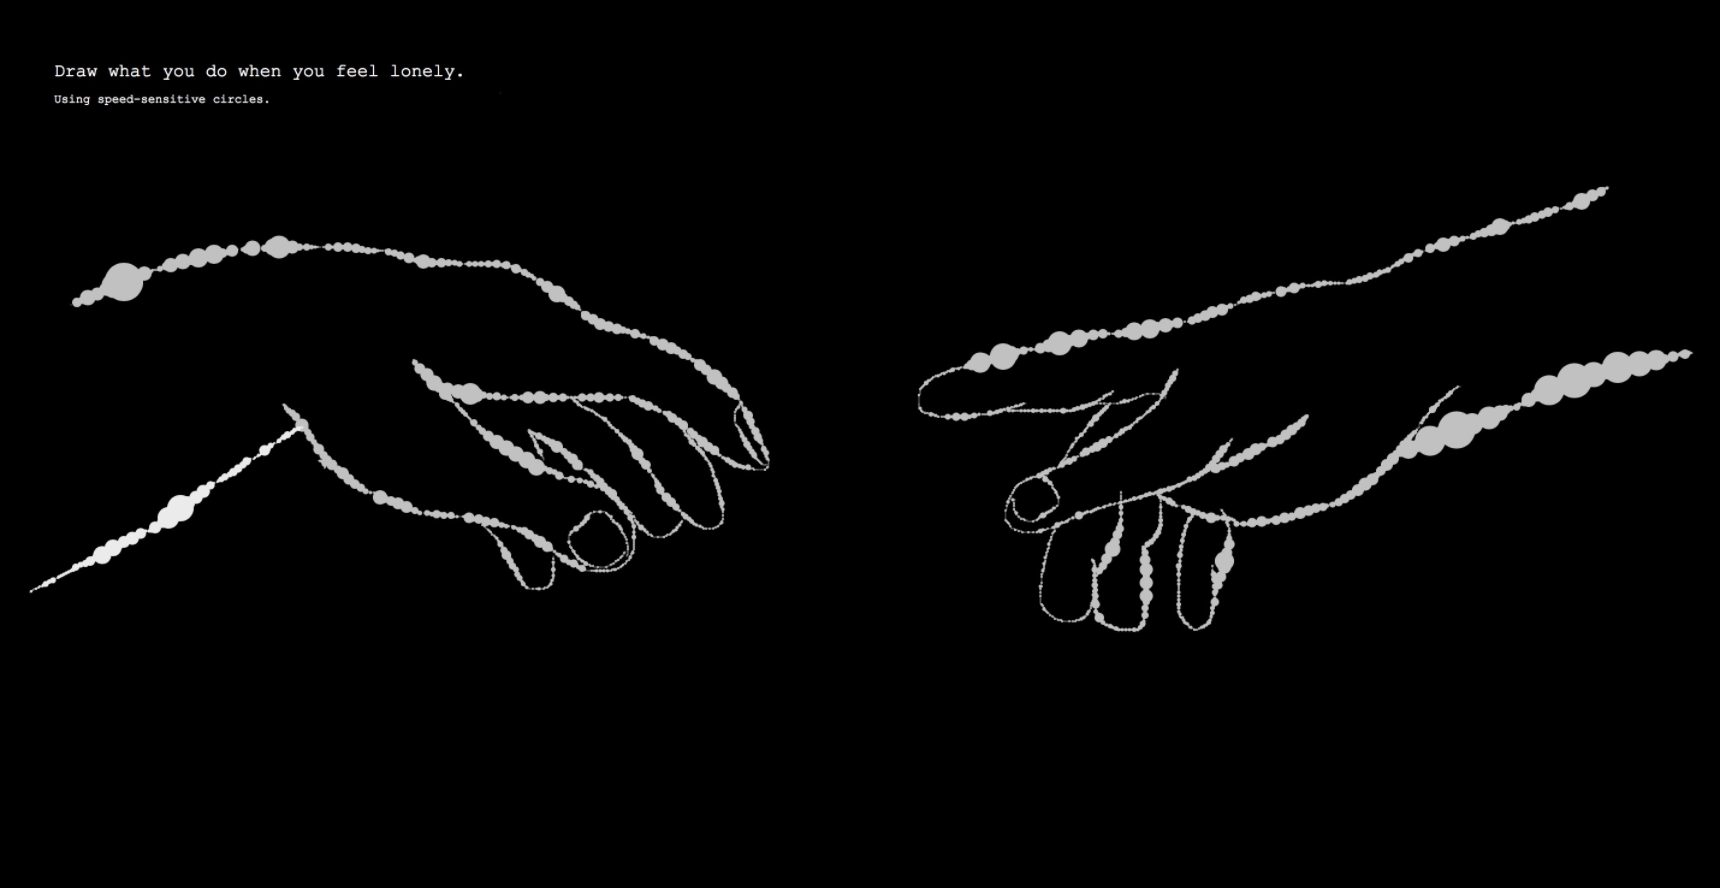 A screen capture of a website with a digital drawing of two hands reaching towards each other.